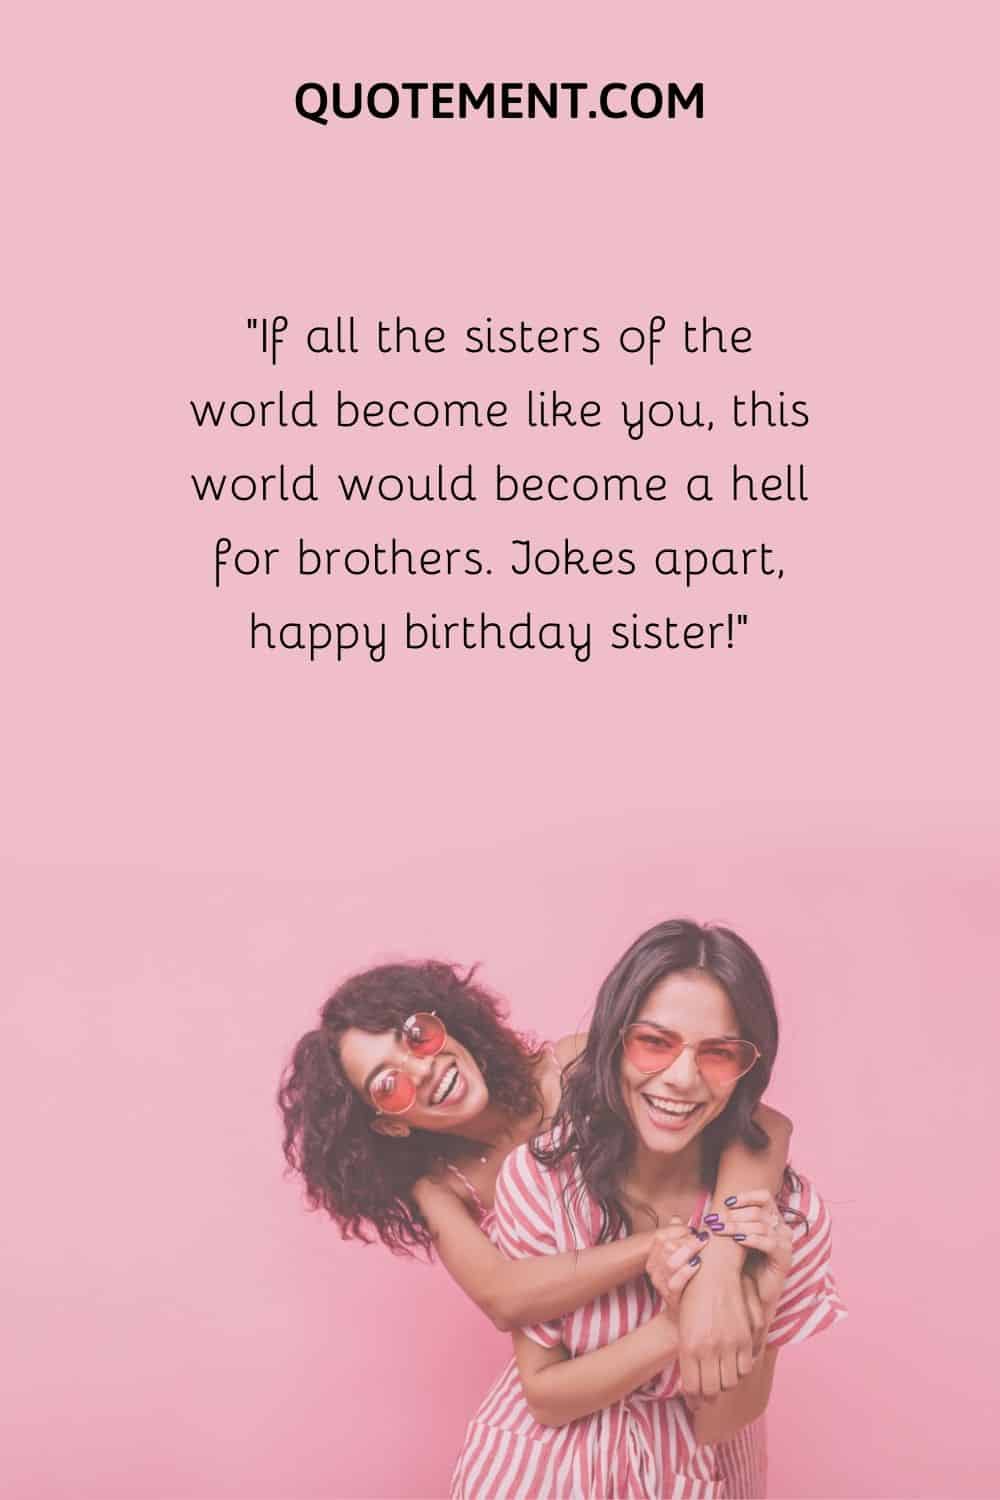 If all the sisters of the world become like you, this world would become a hell for brothers.